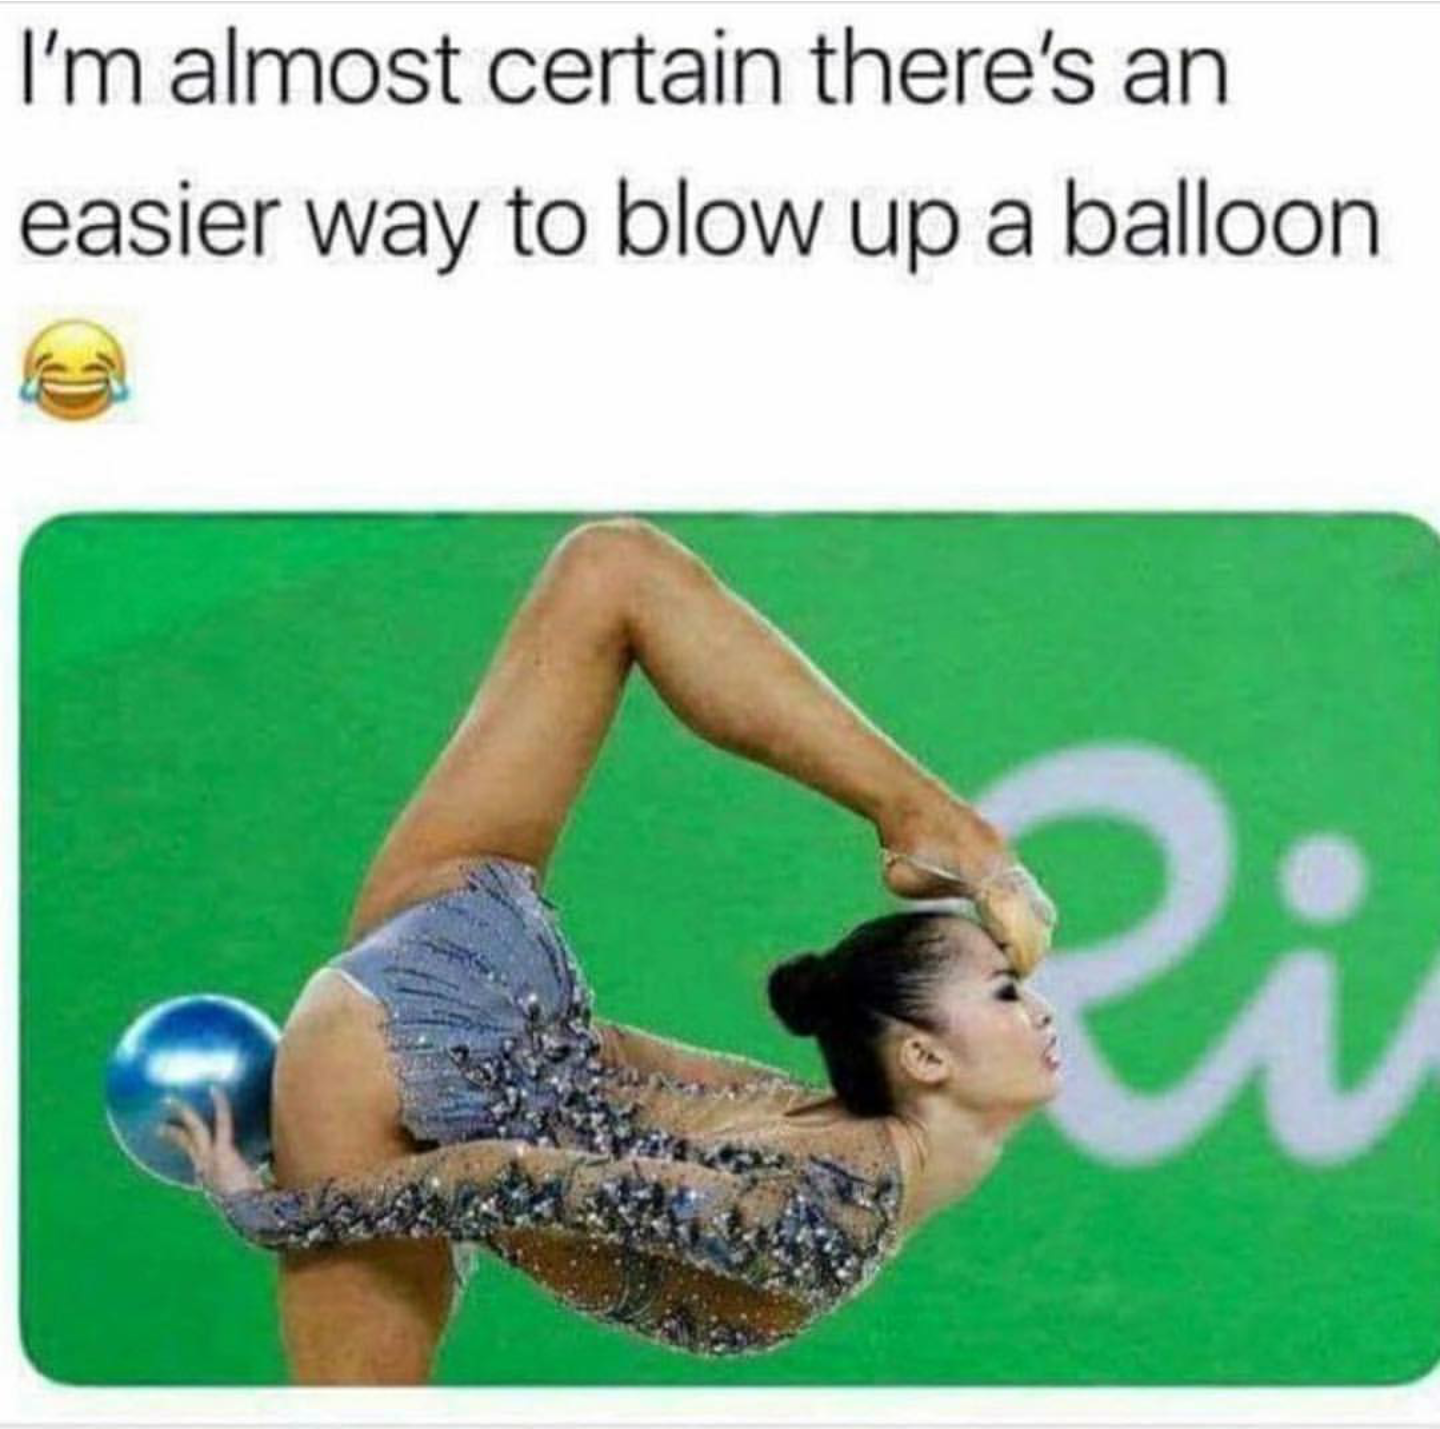 funny memes - I'm almost certain there's an easier way to blow up a balloon